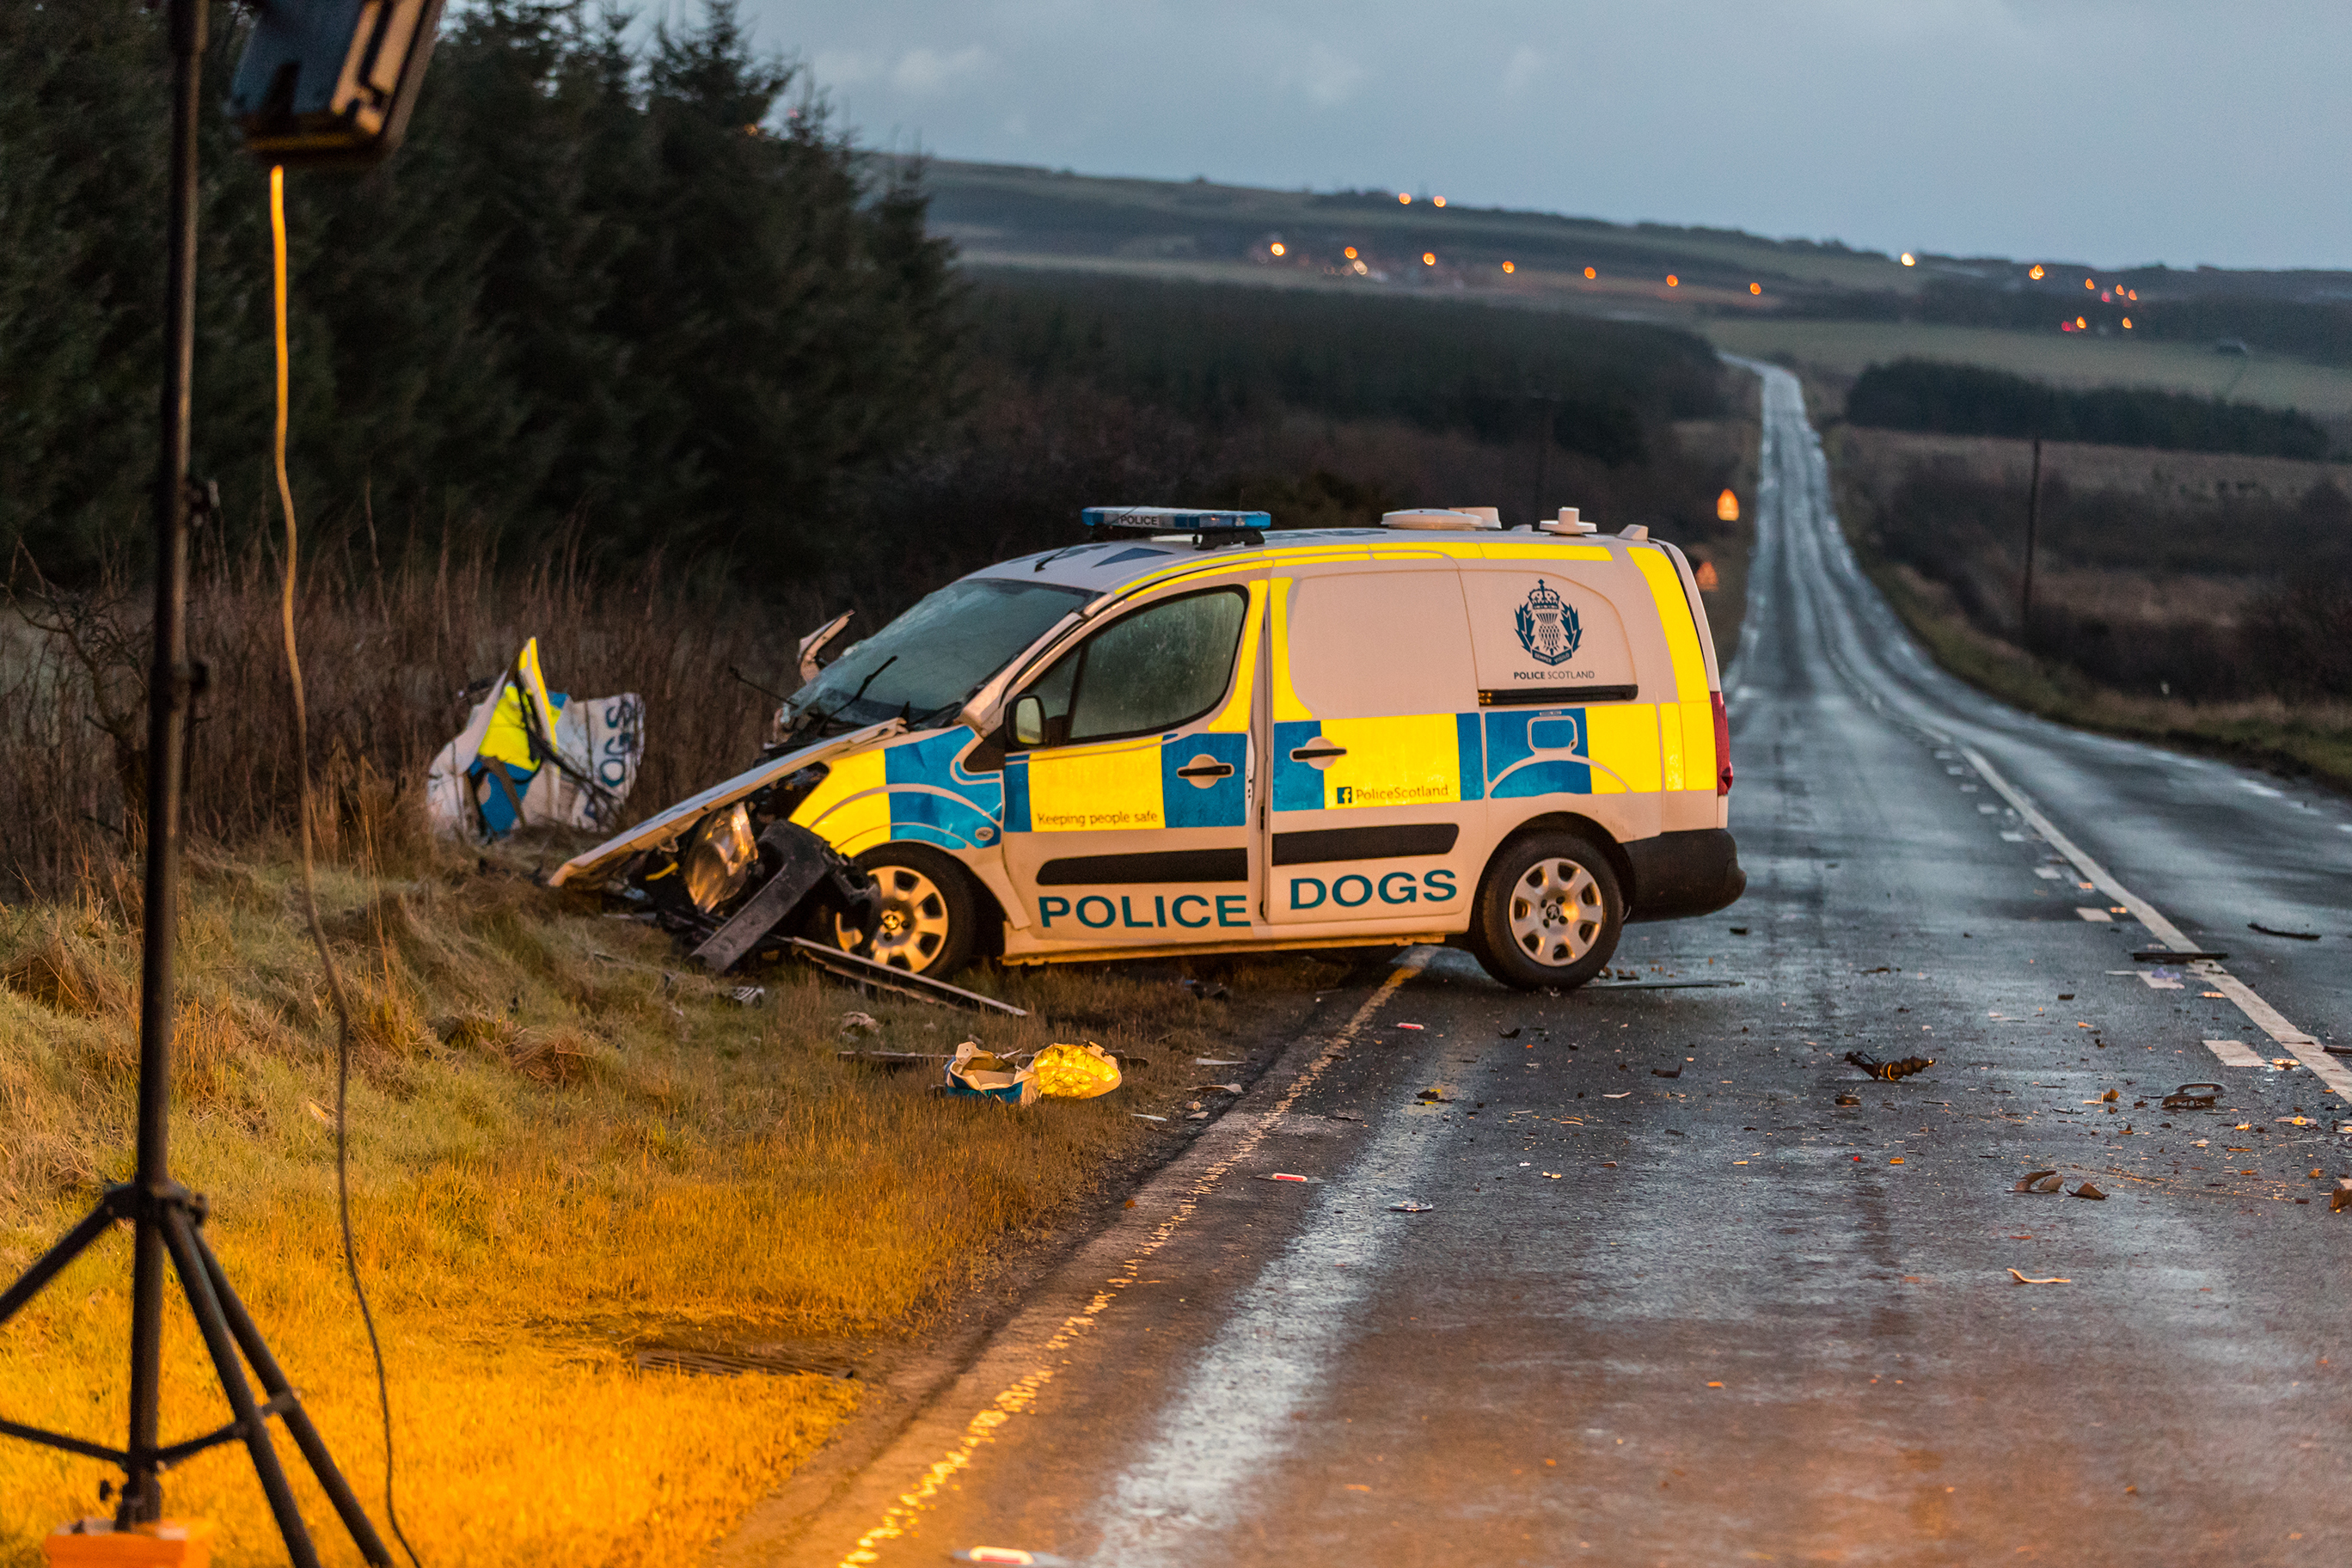 The scene of the serious RTC on the A90 near Longhaven involving a police van